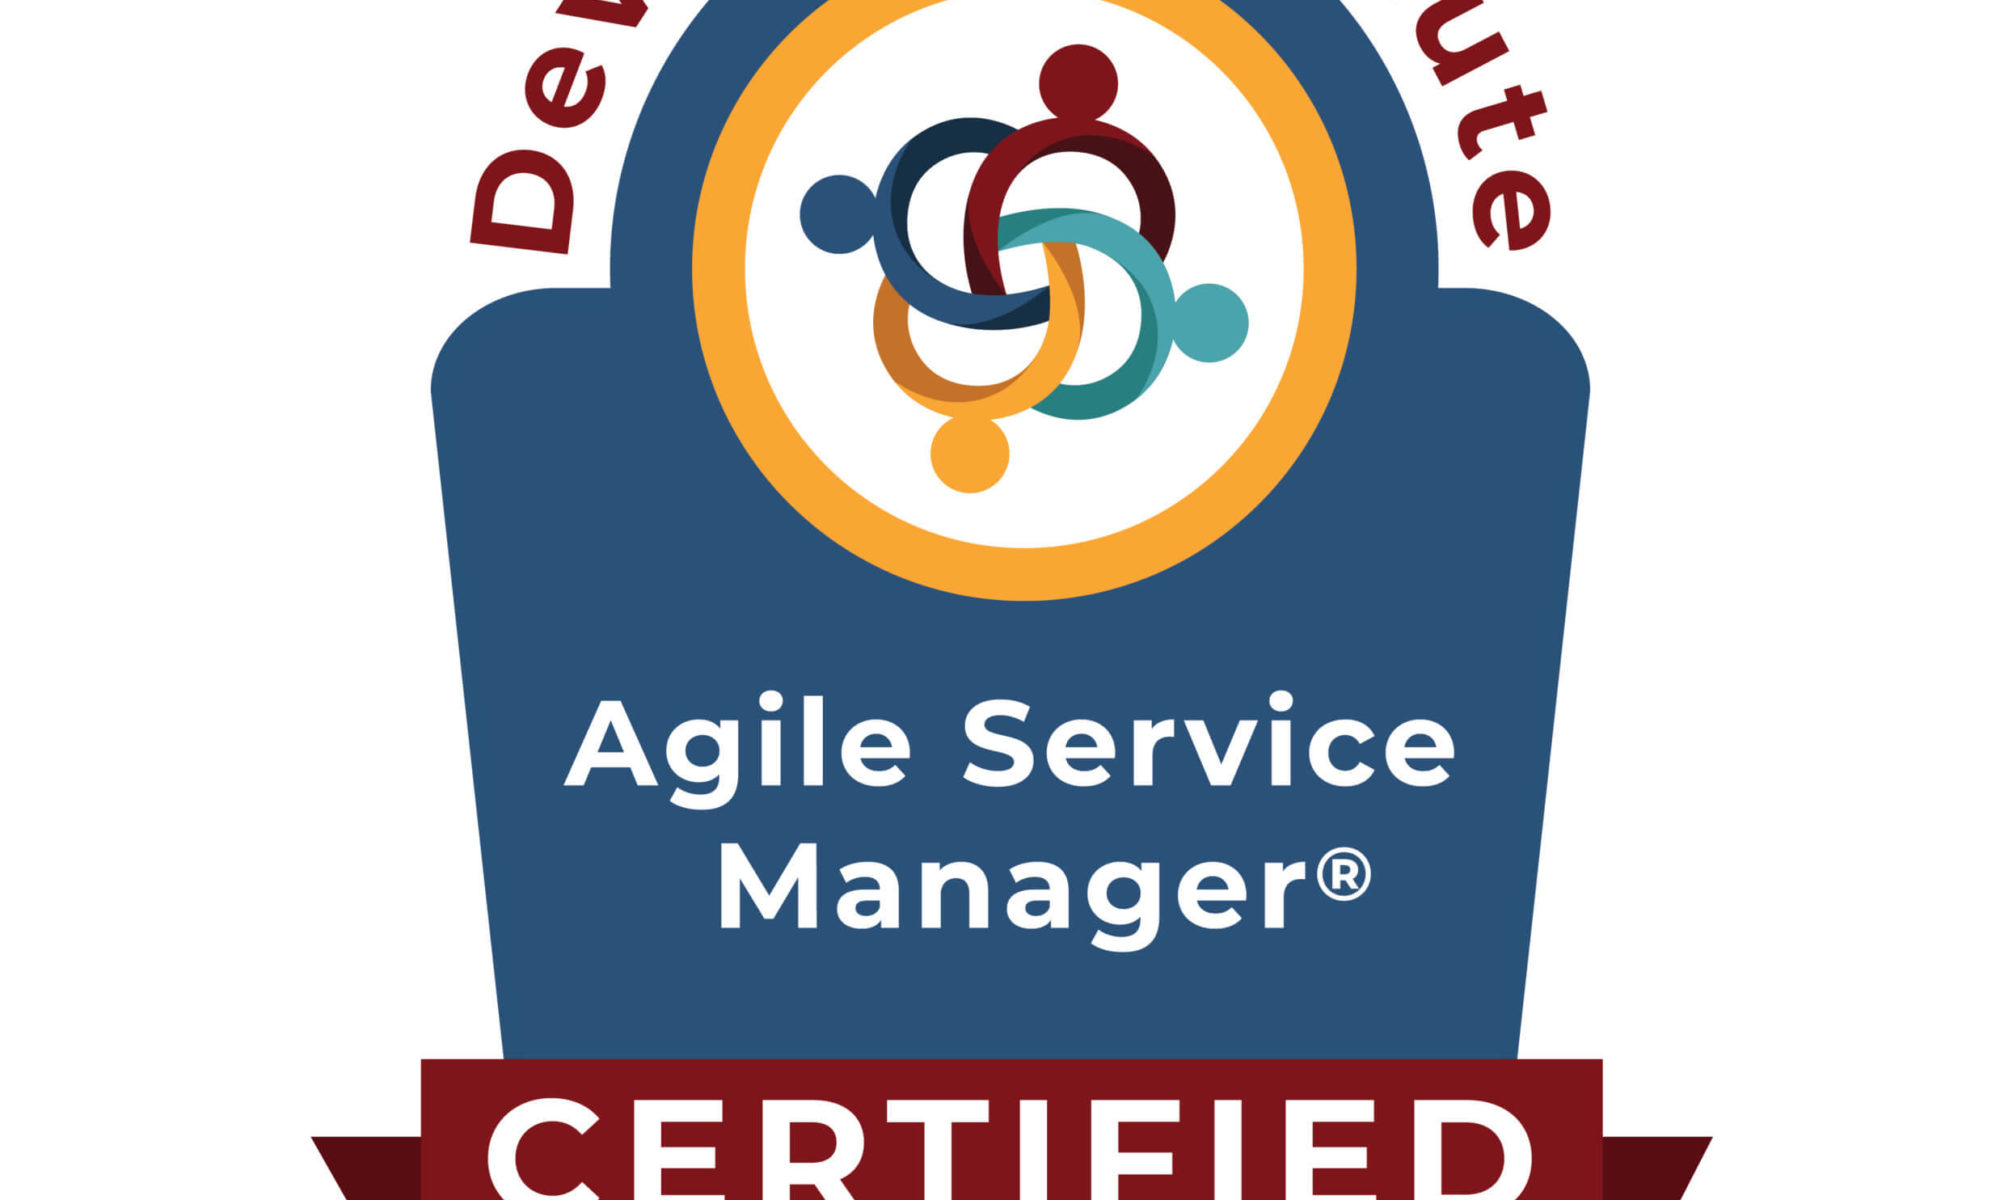 Agile Service Manager